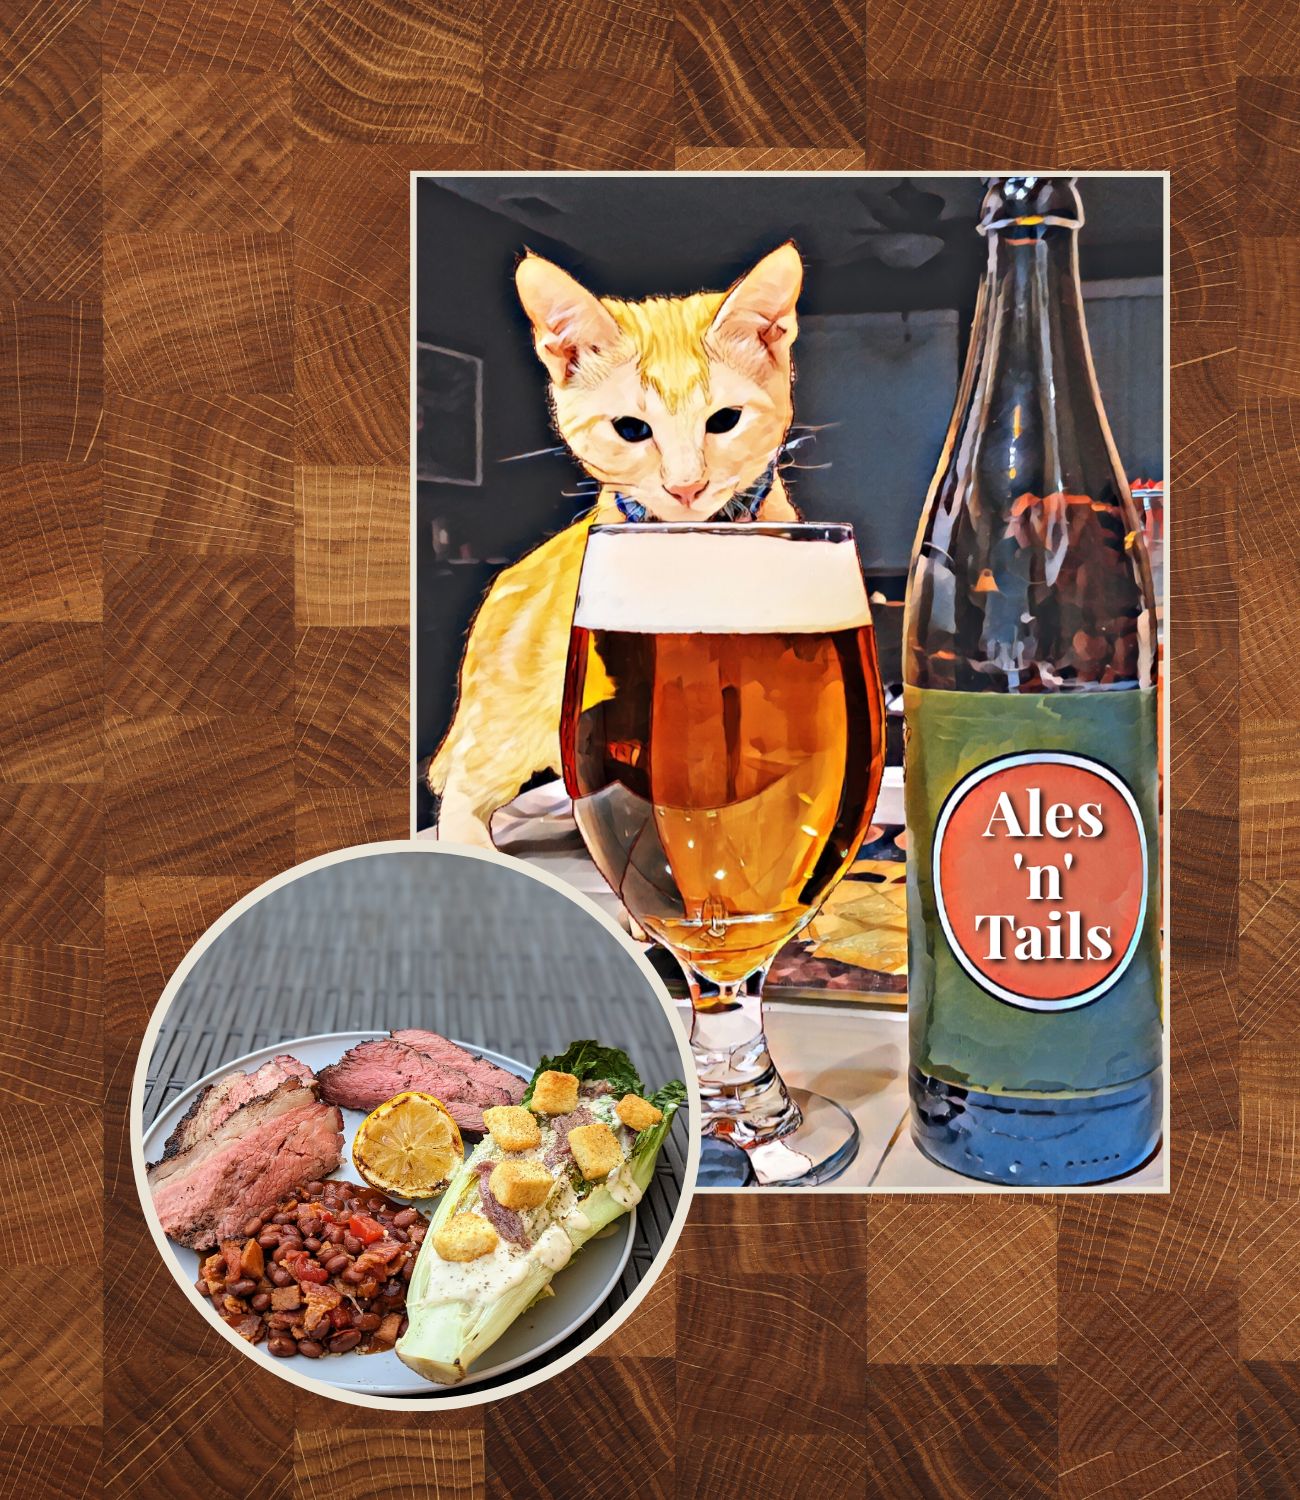 Ales and Tails Logo with Steak on the grill